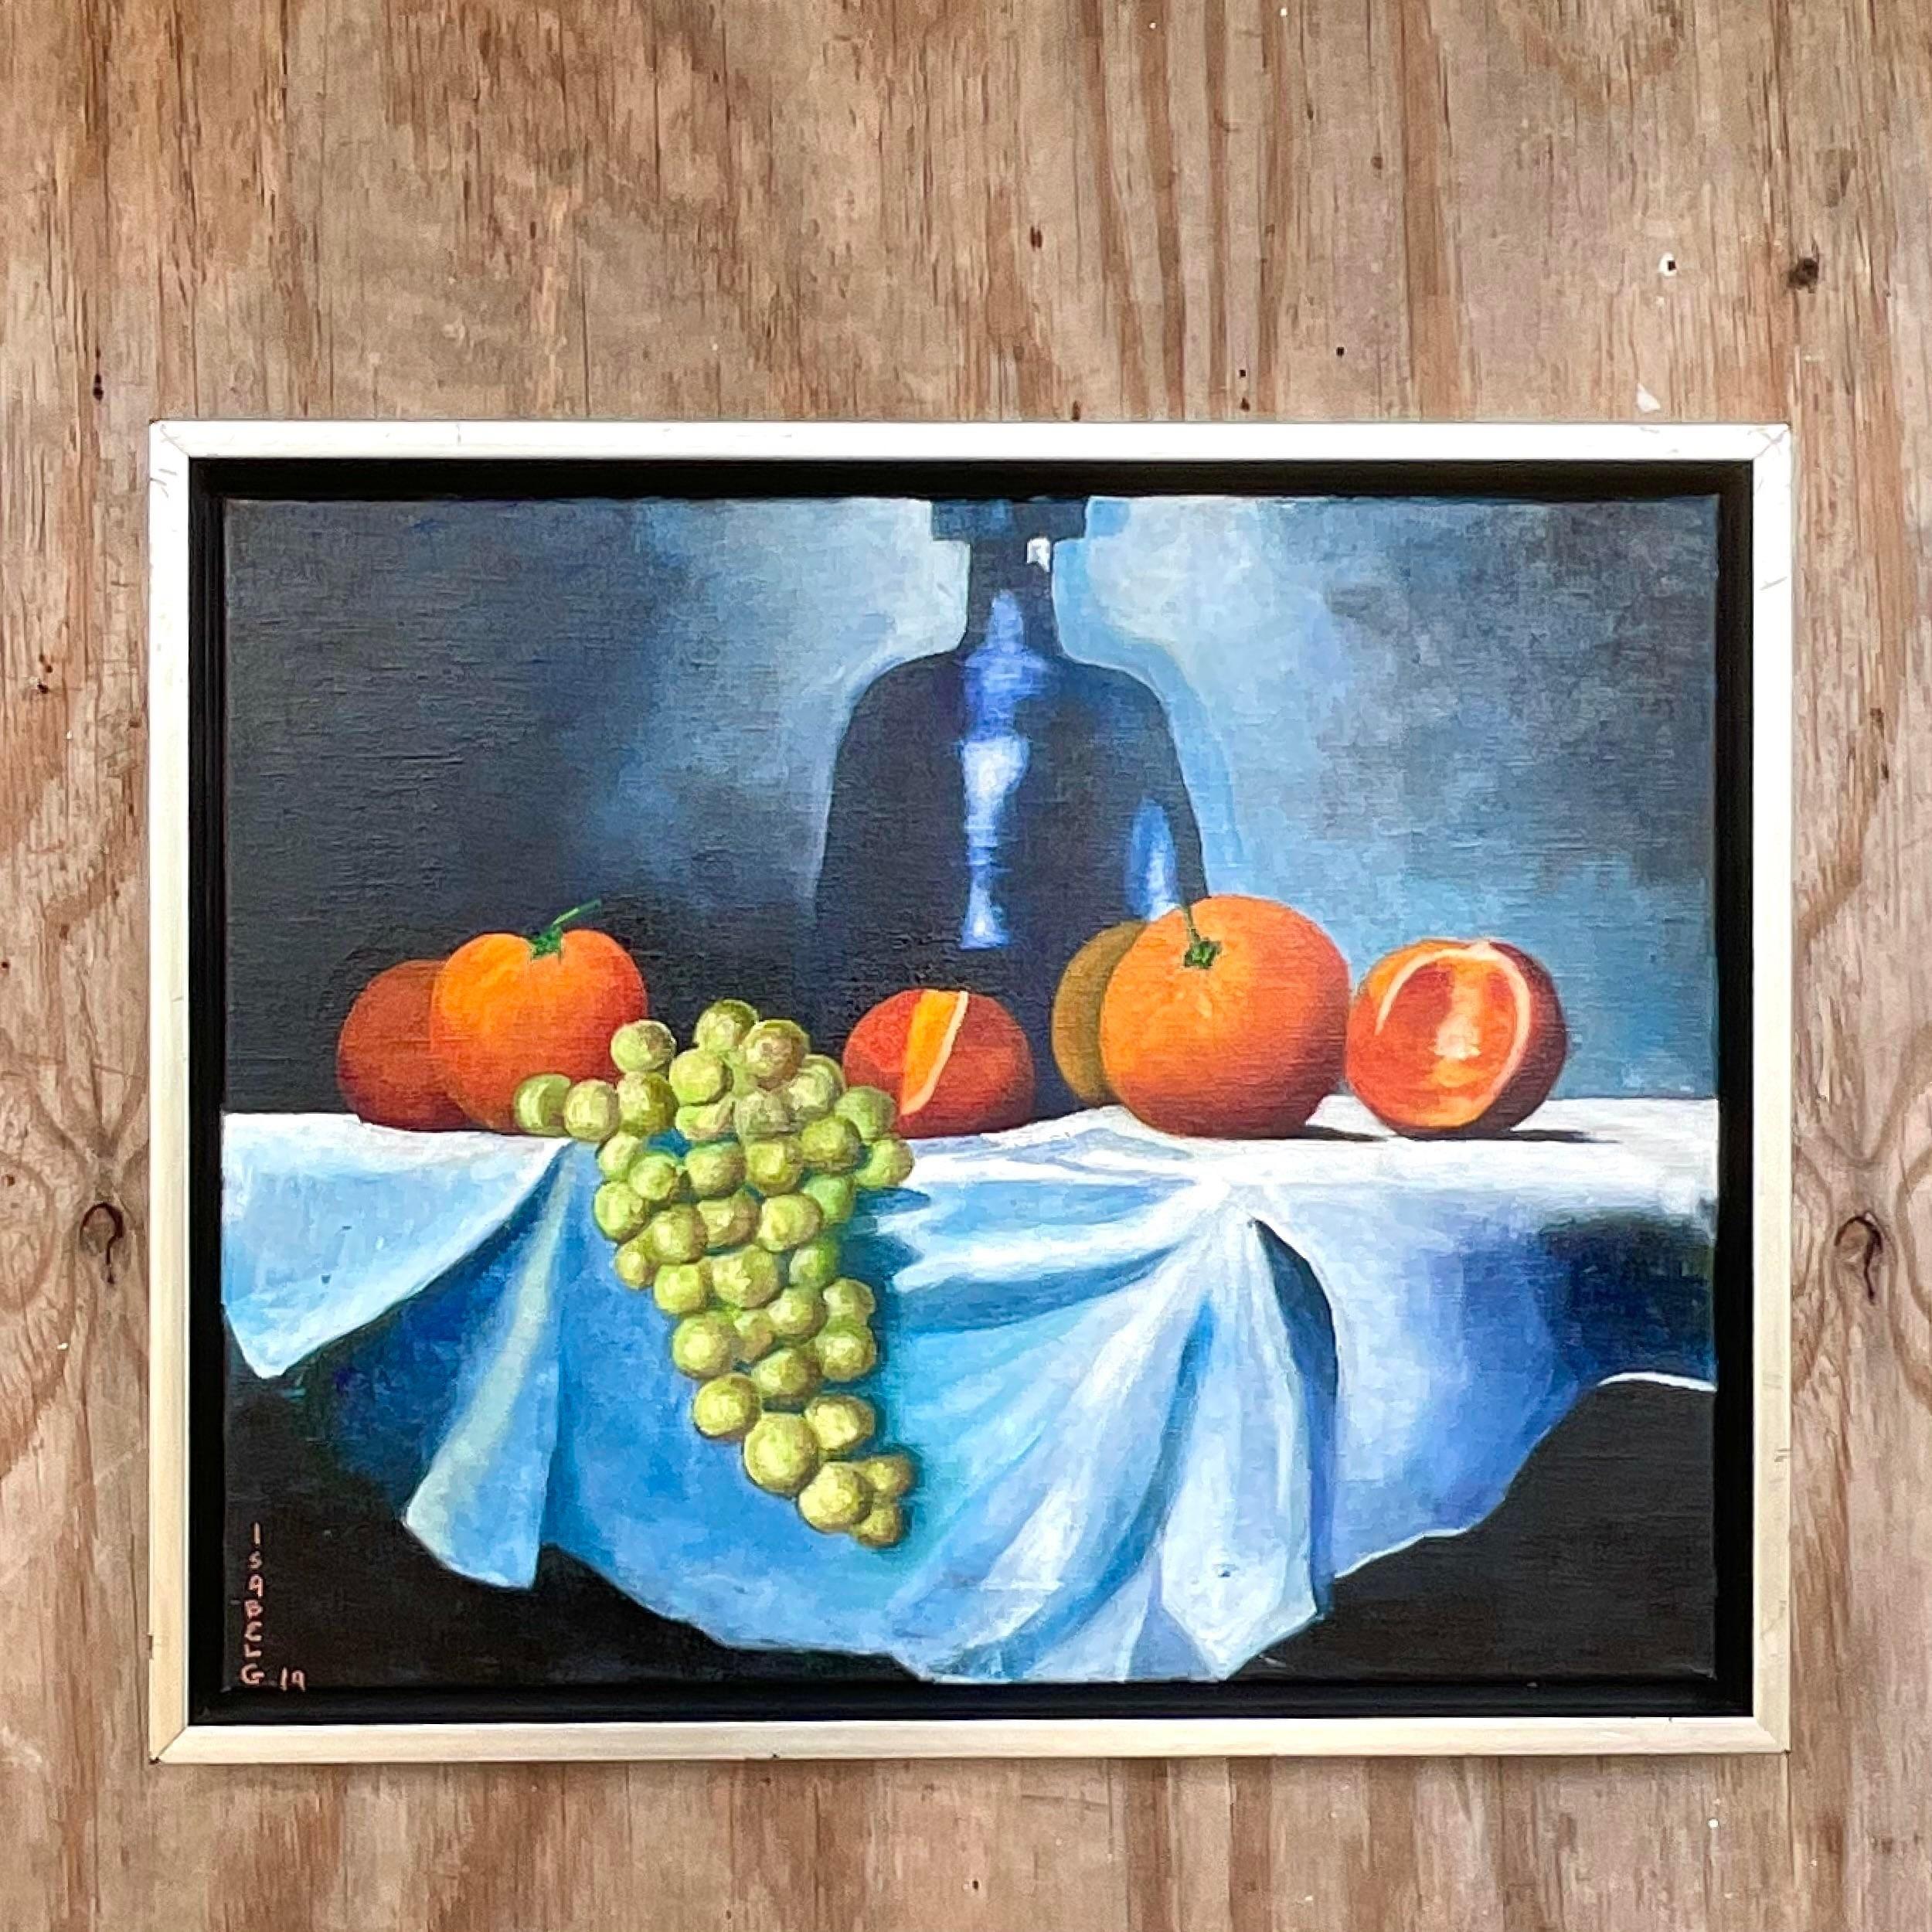 A fabulous vintage Boho original oil painting. A chic still life in bright clear colors. Signed and dated by the artist. Acquired from a Palm Beach estate. 